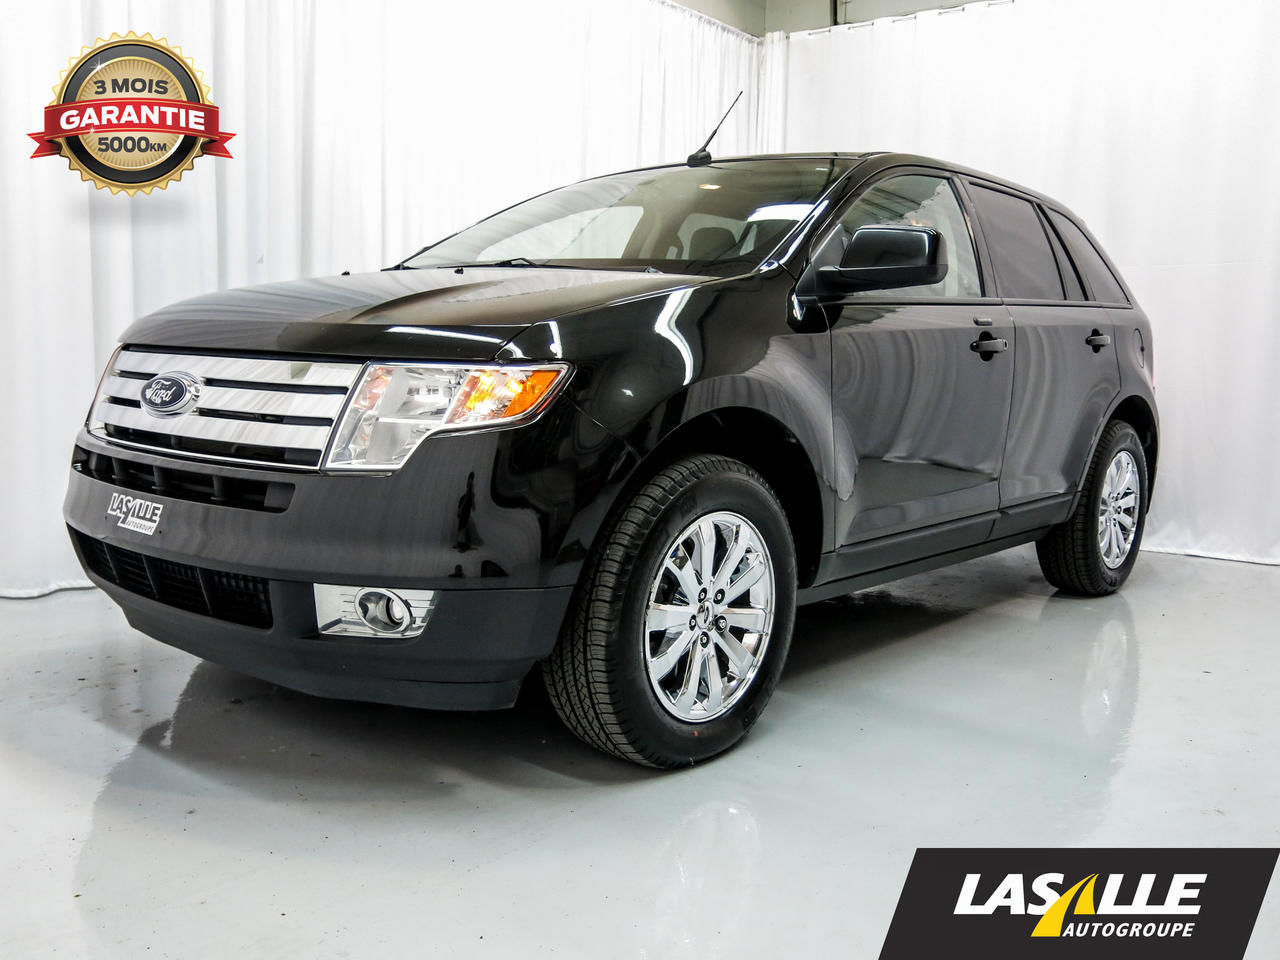 Used 2010 ford edge prices #4